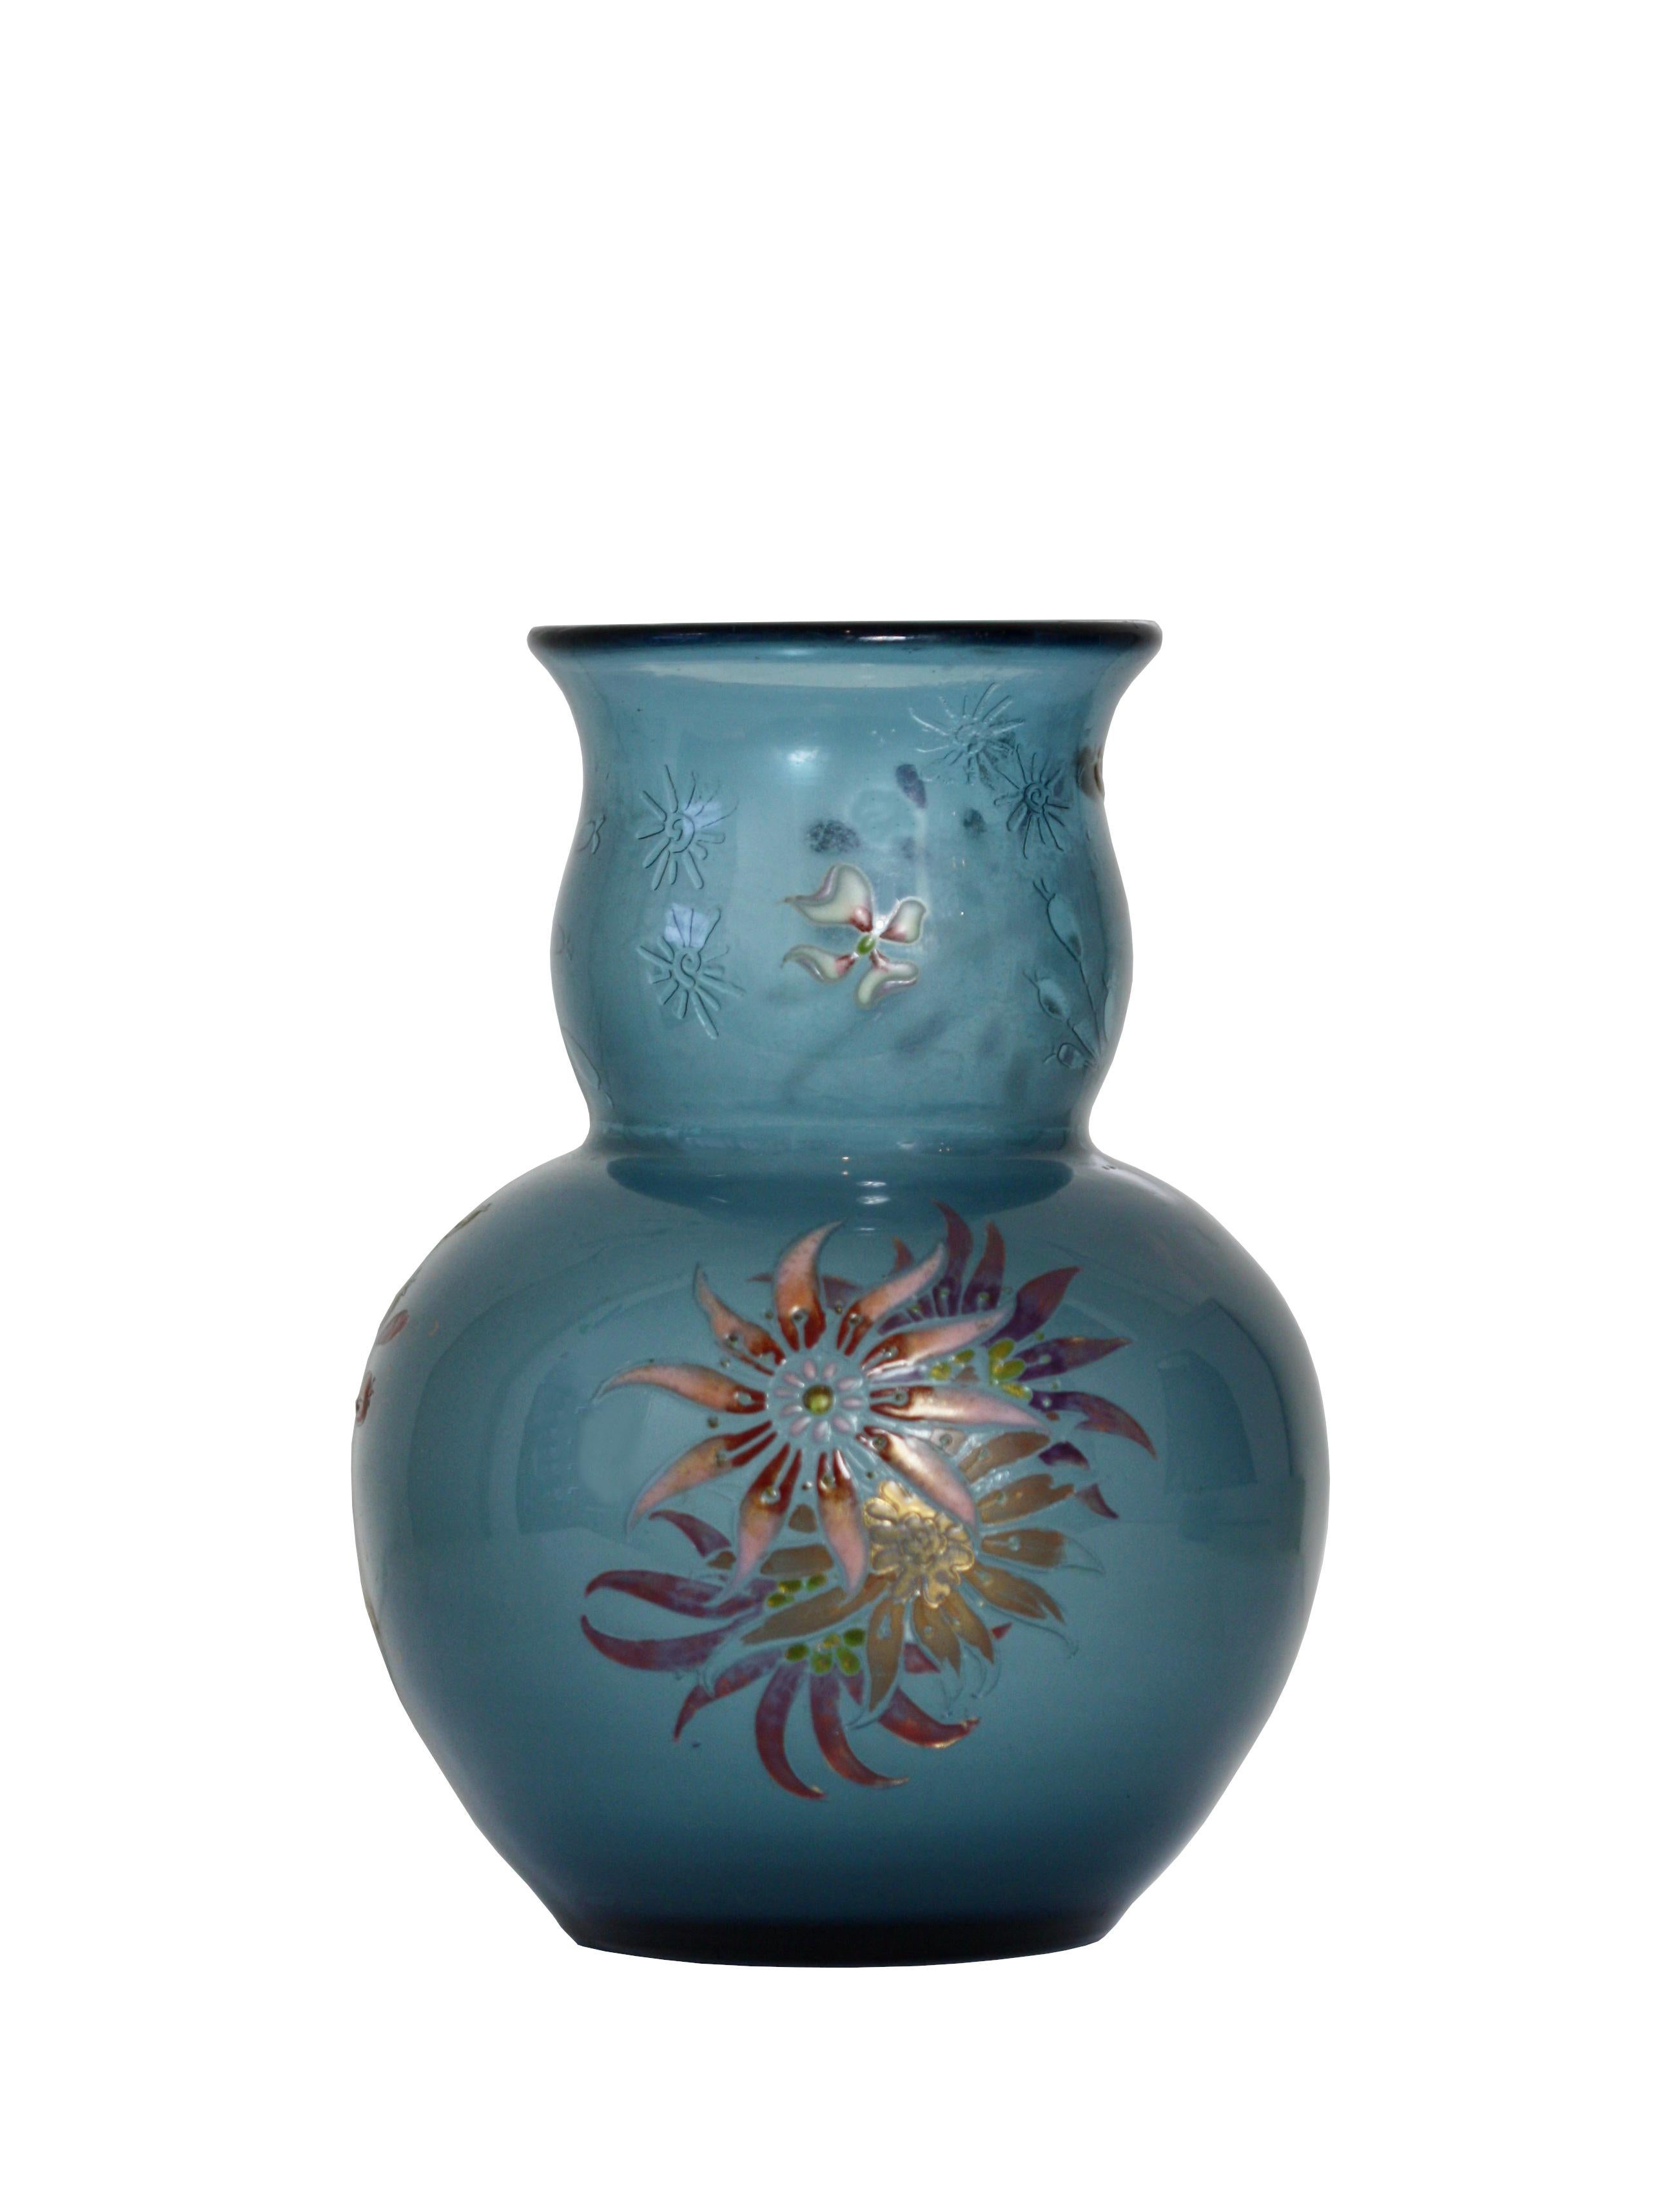 Émile GALLÉ (1846-1904),
circa 1890
The enamel decorated bulbous body with an out-turned rim of translucent to cloudy marine blue, decorated with floral sprays highlighted in gilt, the neck internally etched with dotted starbursts
Signed Galle